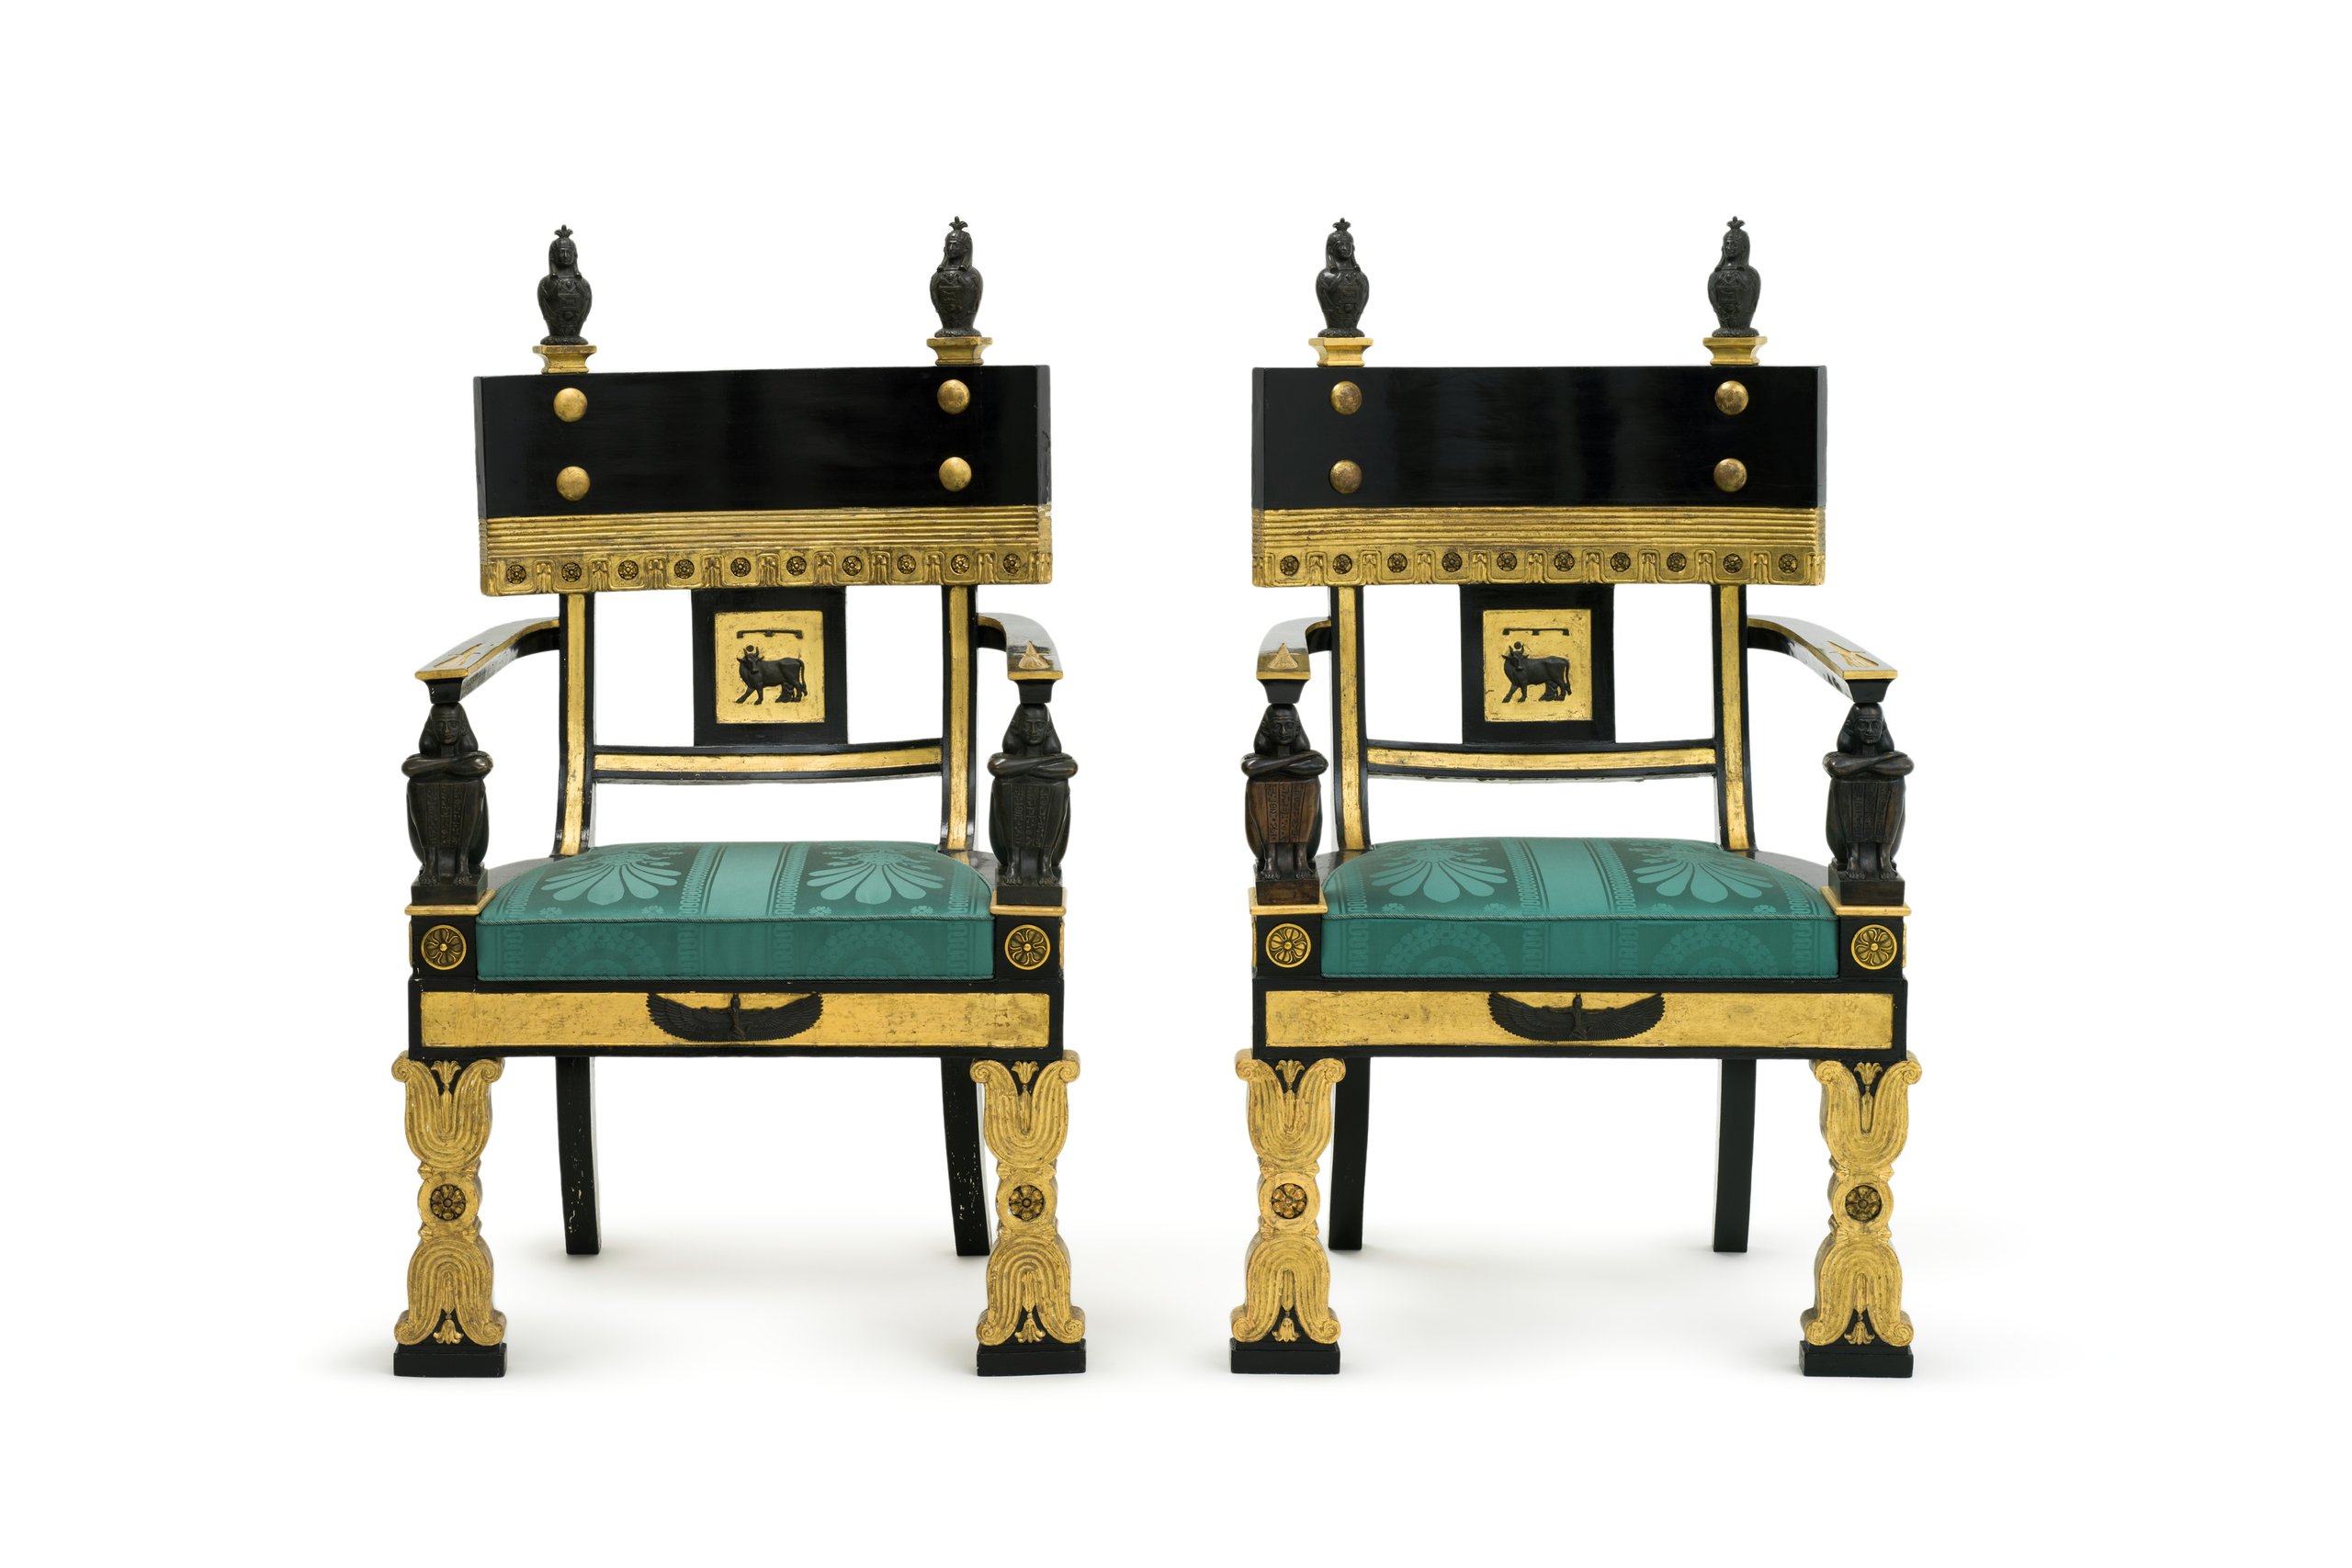 Regency Egyptian Revival style armchairs by Thomas Hope